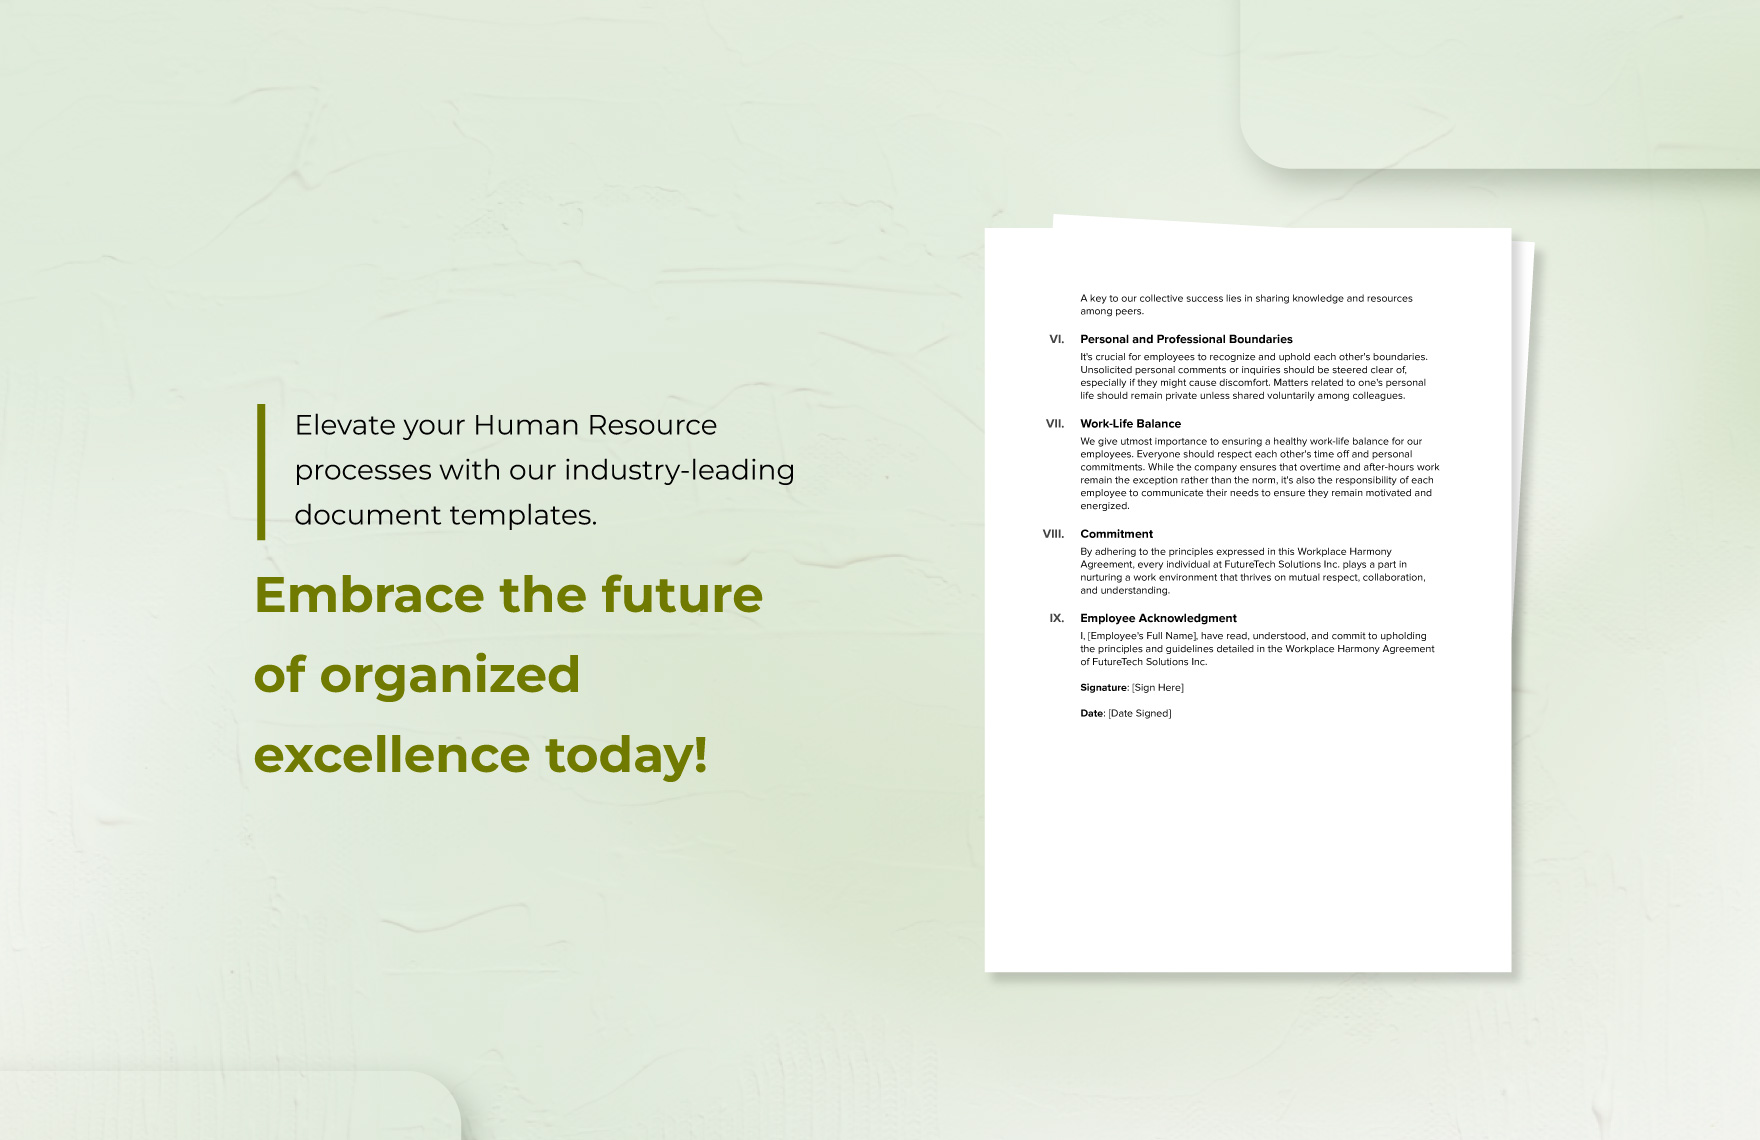 Workplace Harmony Agreement HR Template